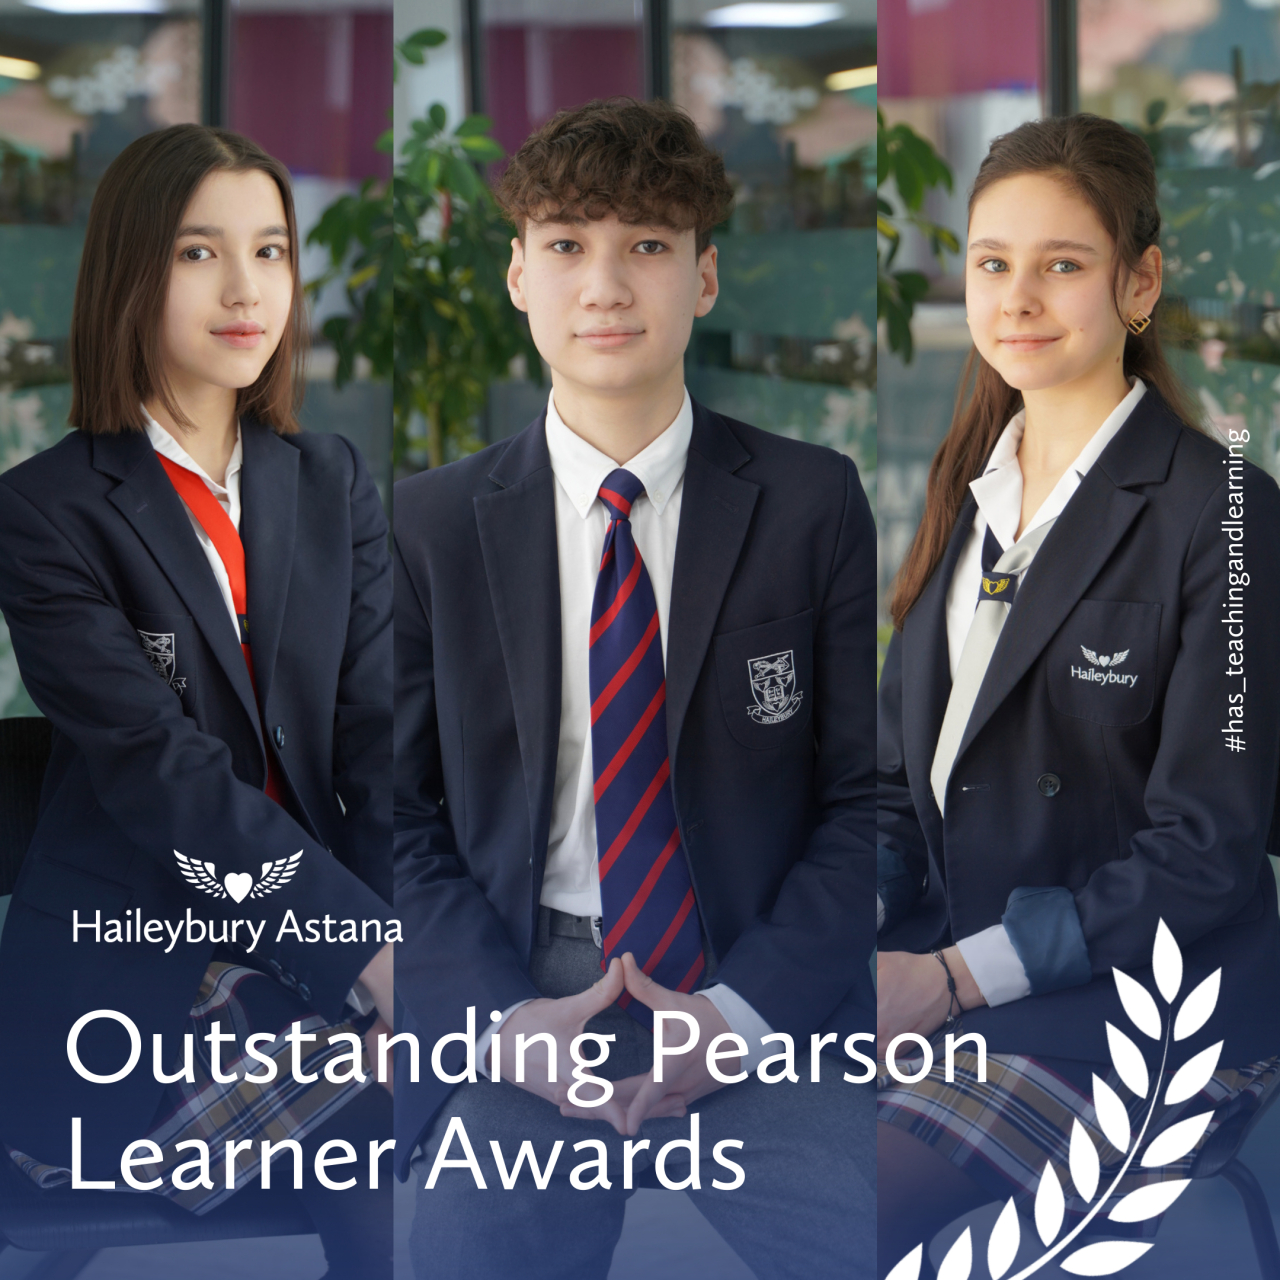 Outstanding Pearson Learner Awards for Haileybury Astana Students